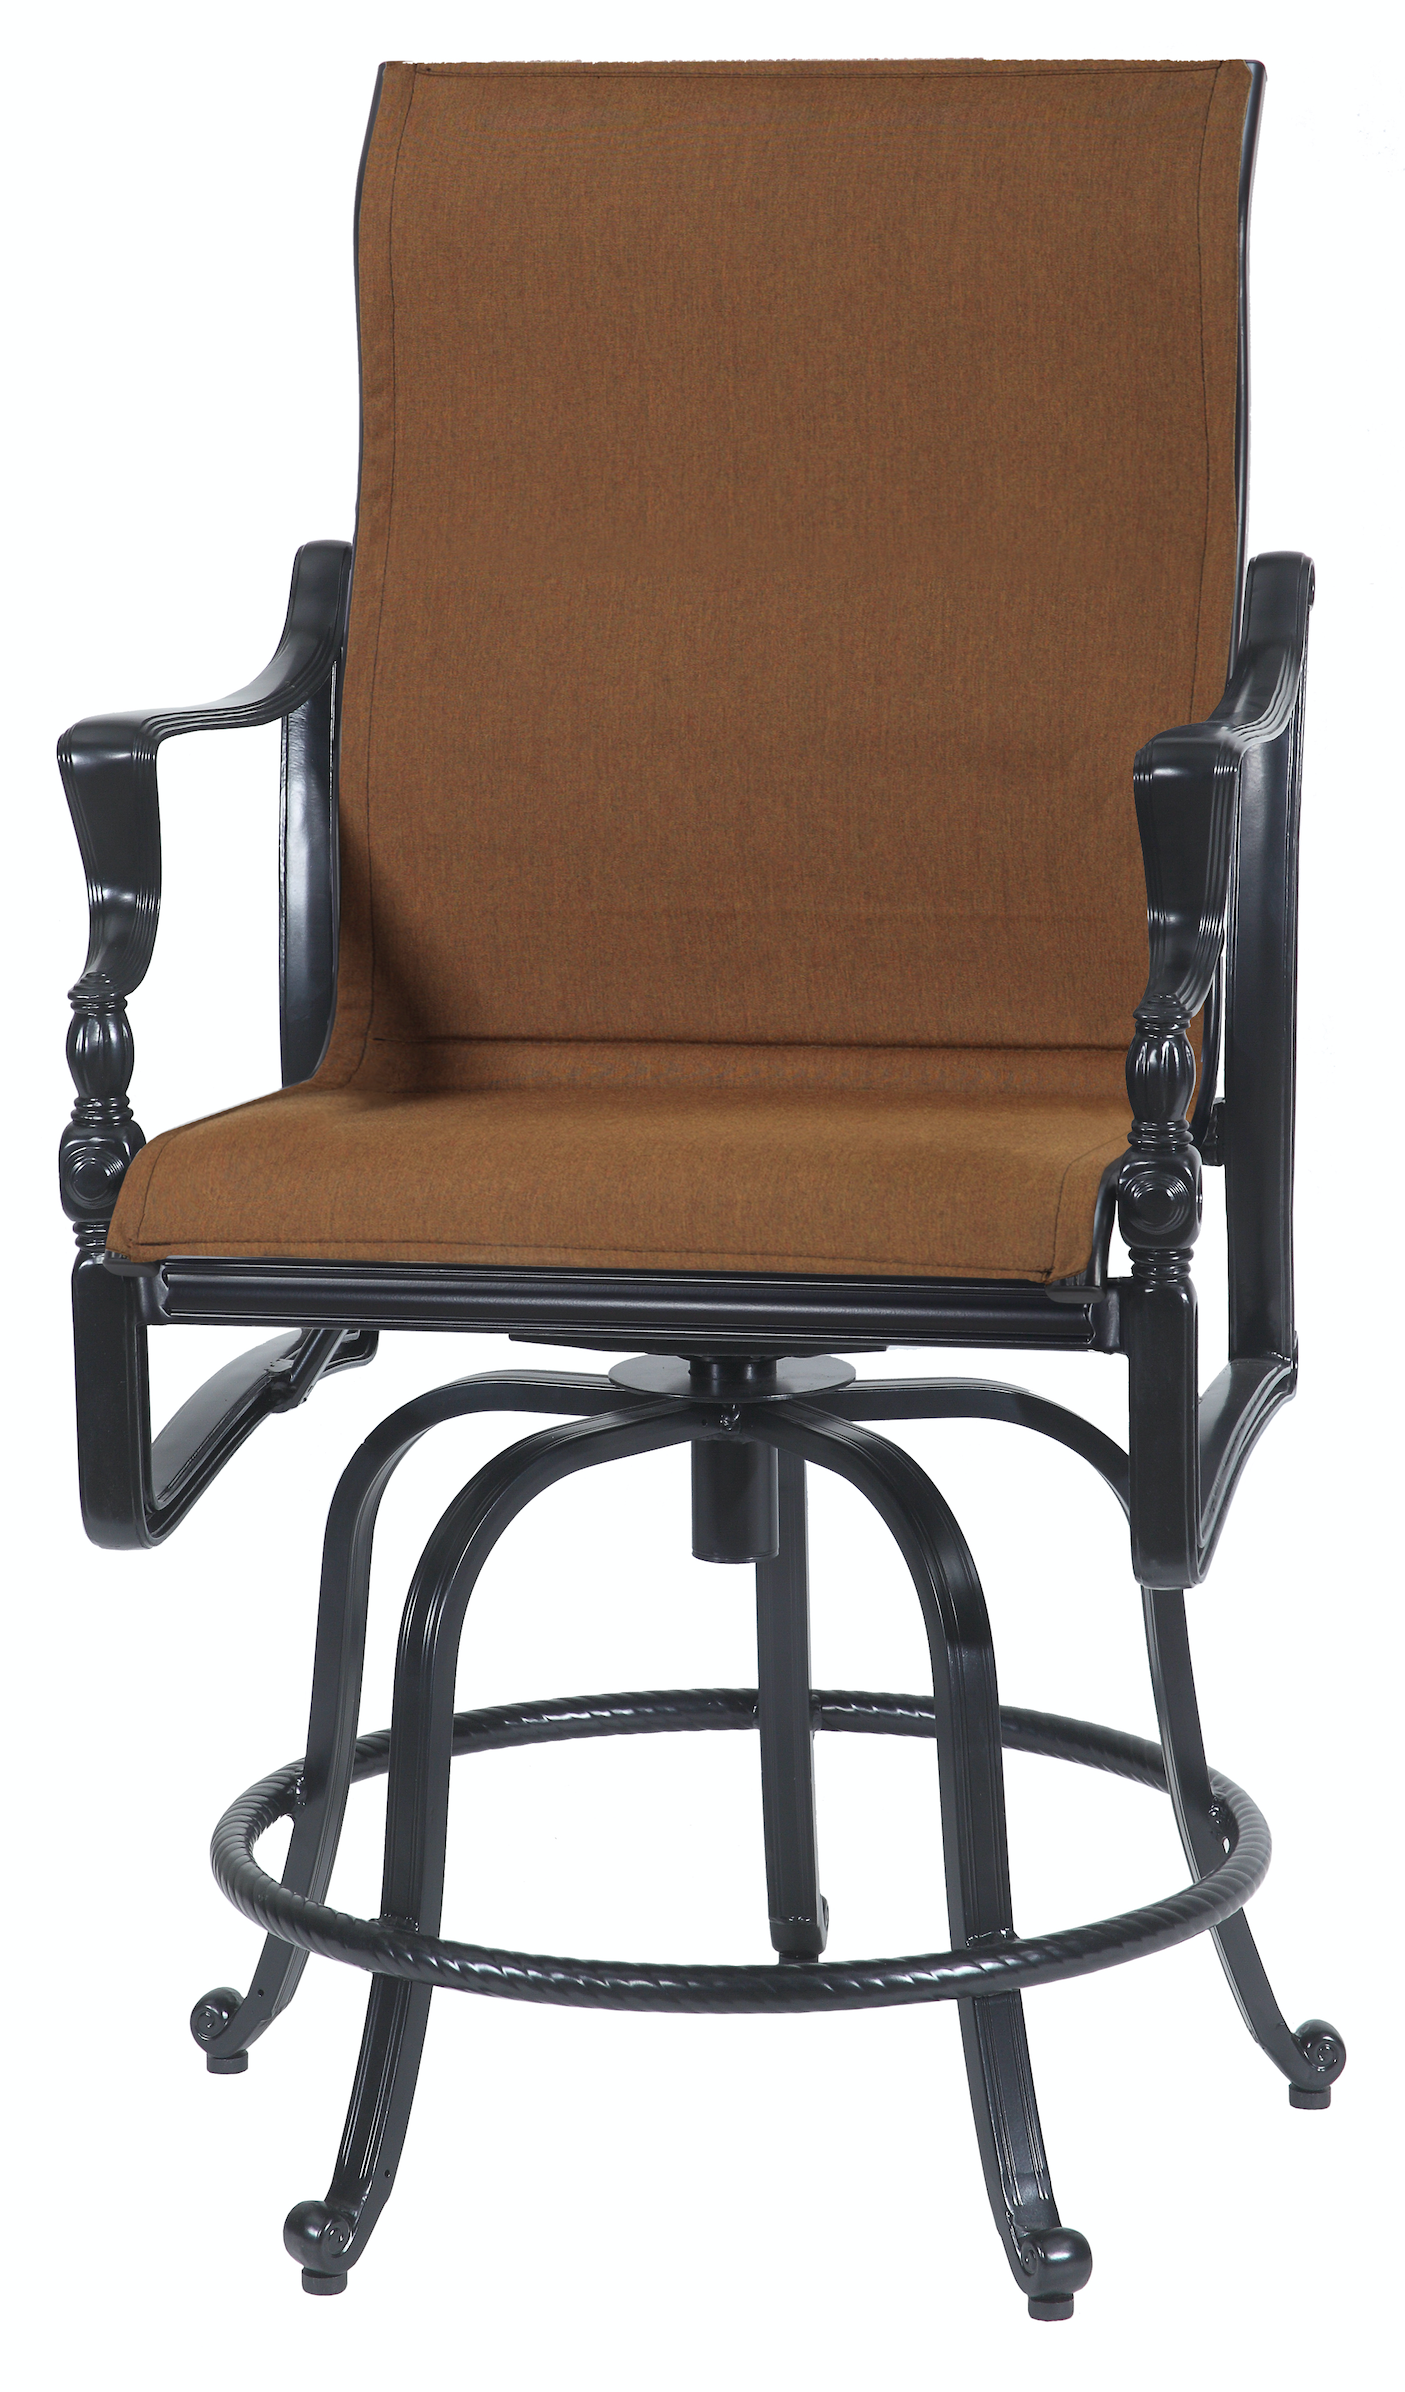 Click to View all Bel Air Seating Options